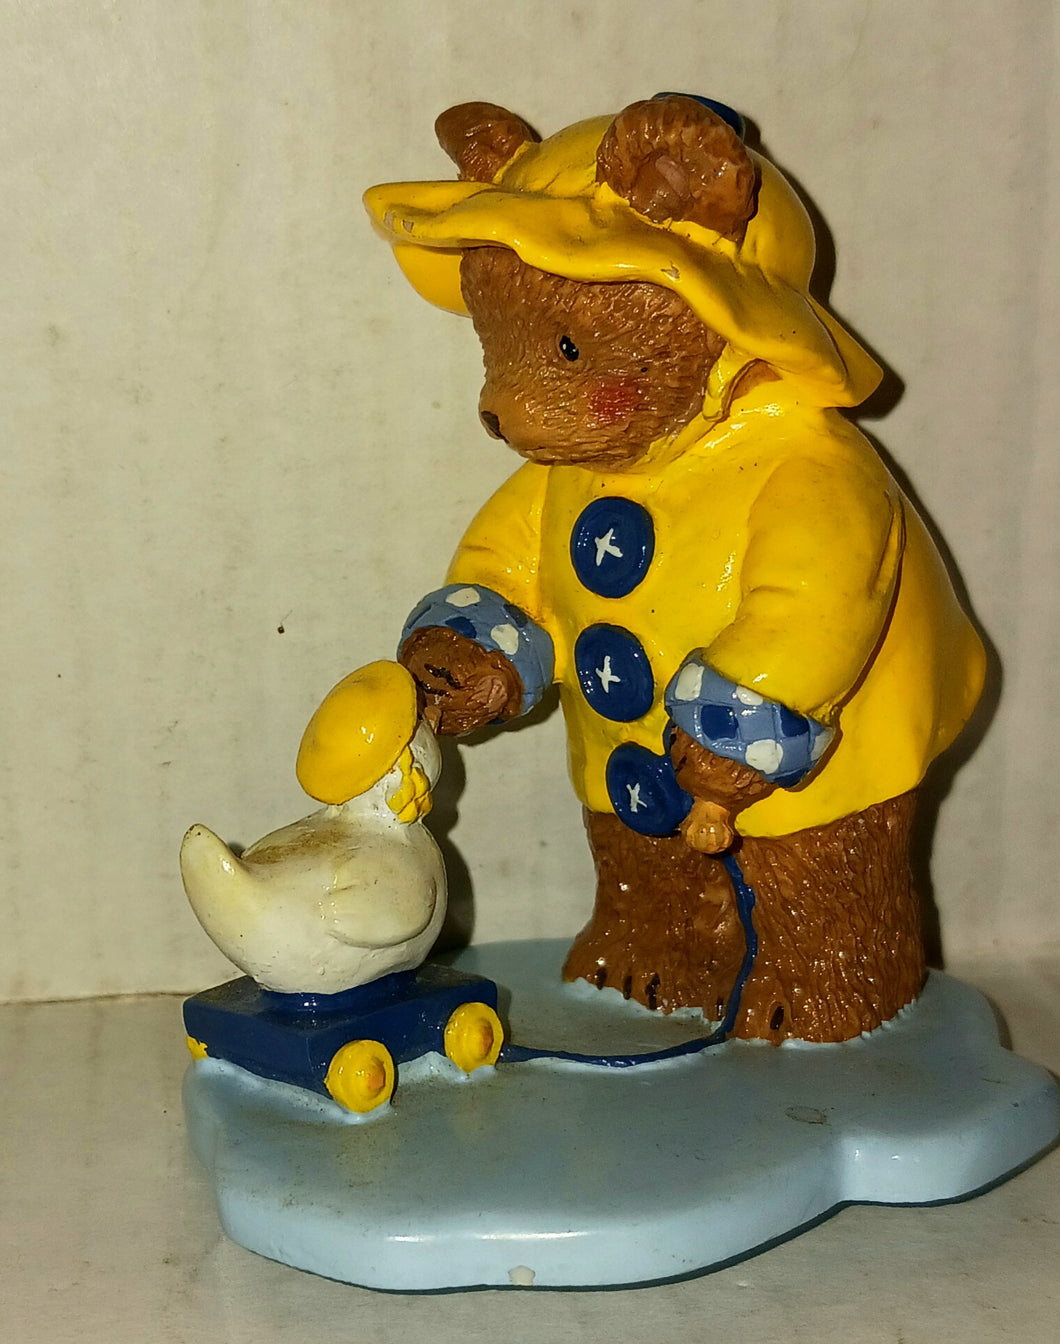 Vintage Giftcraft Peggy Ackley Inc Rainy Day Pals Resin Figurine Bear Goose Handmade Low Number 233 of 800004